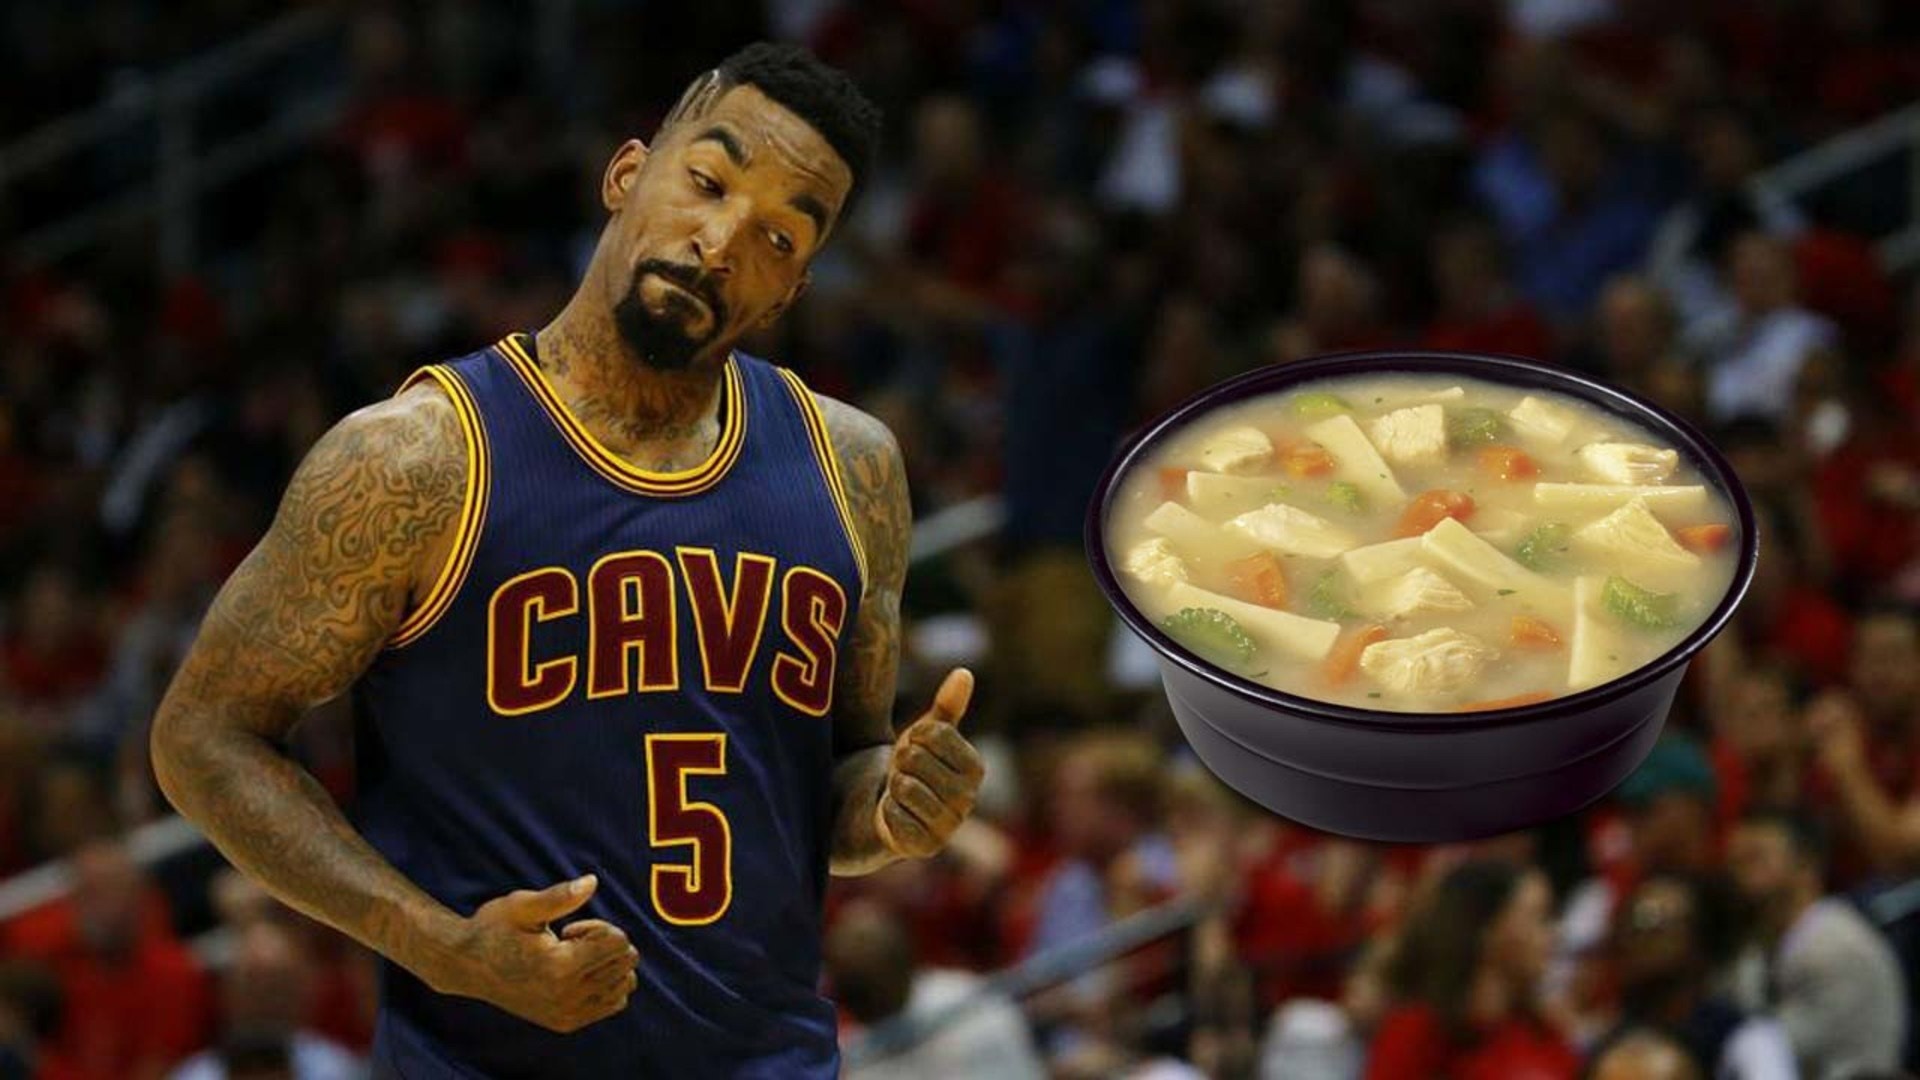 1920x1080 JR Smith's Suspension by the Cavs Was Over a Bowl of SOUP